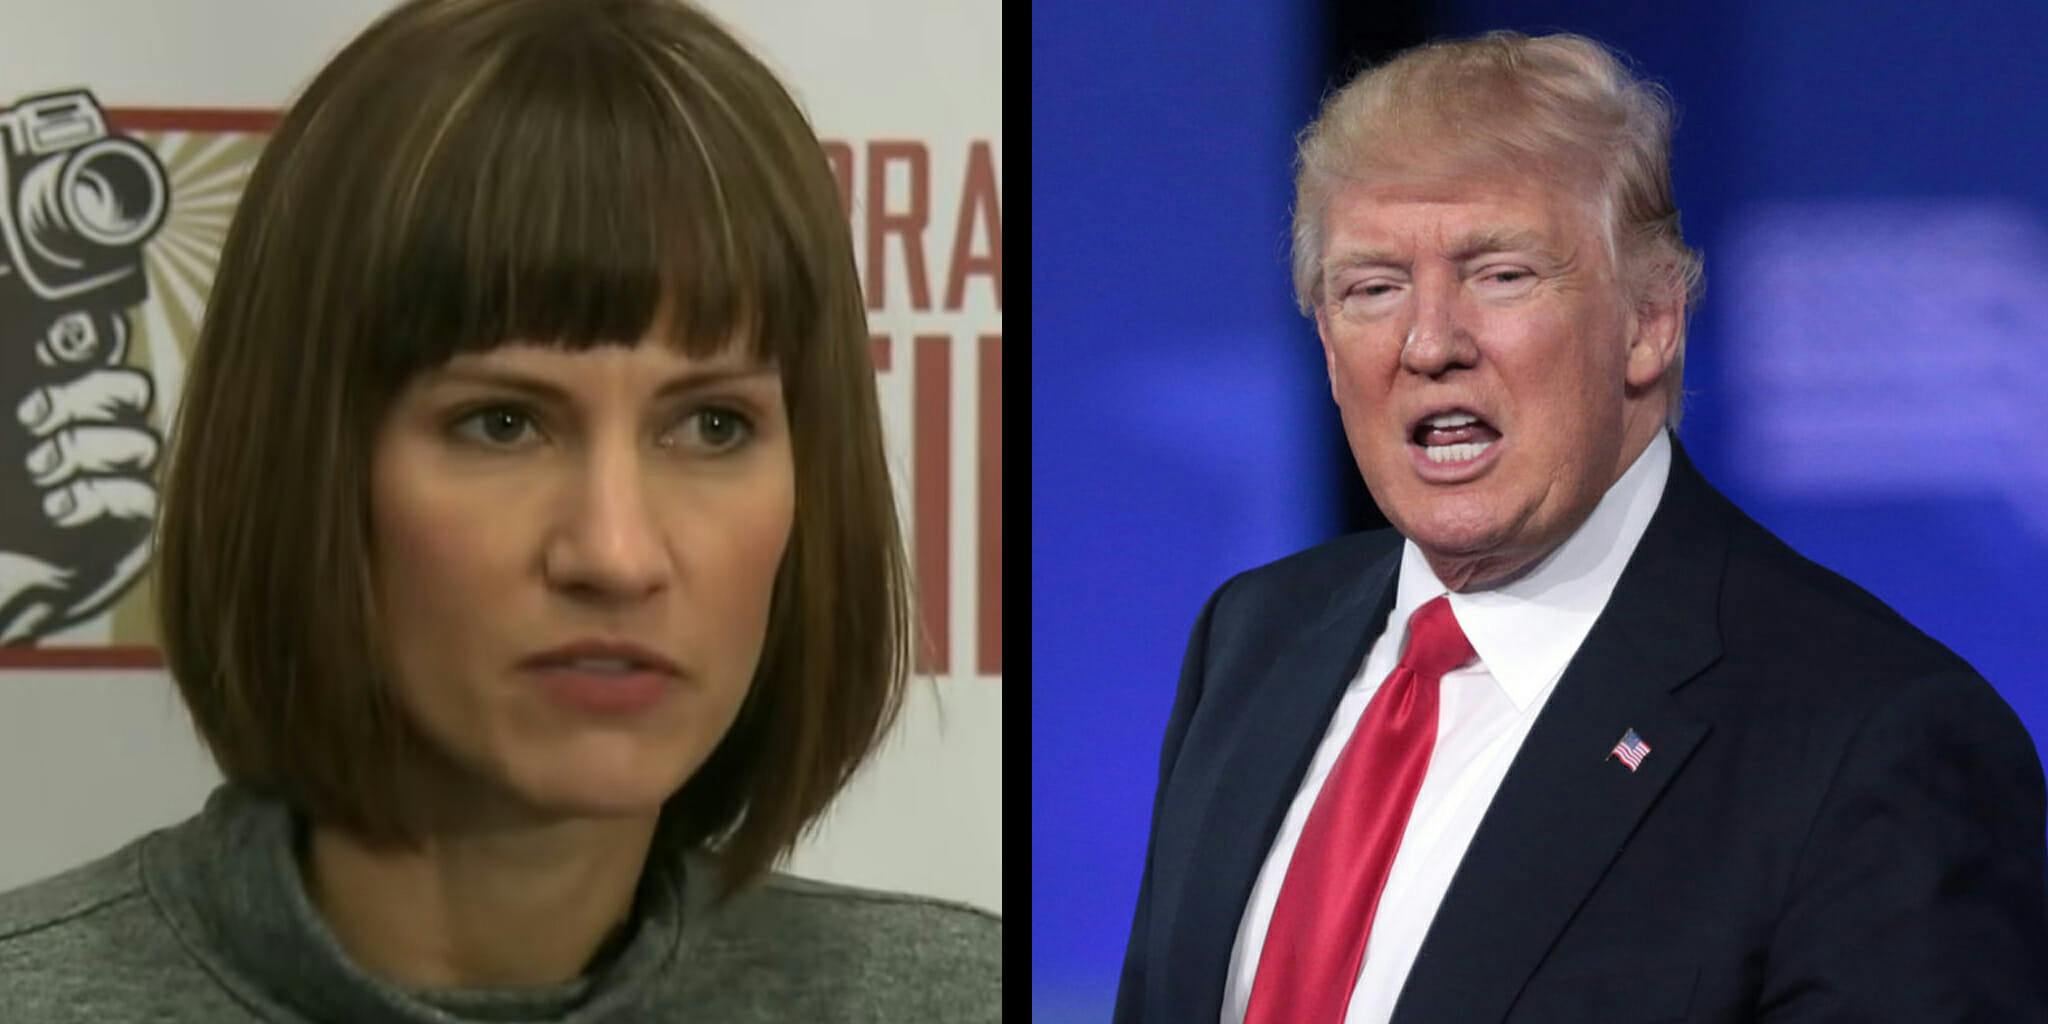 Trump Denies Account Of Woman Who Says He Forcibly Kissed Her